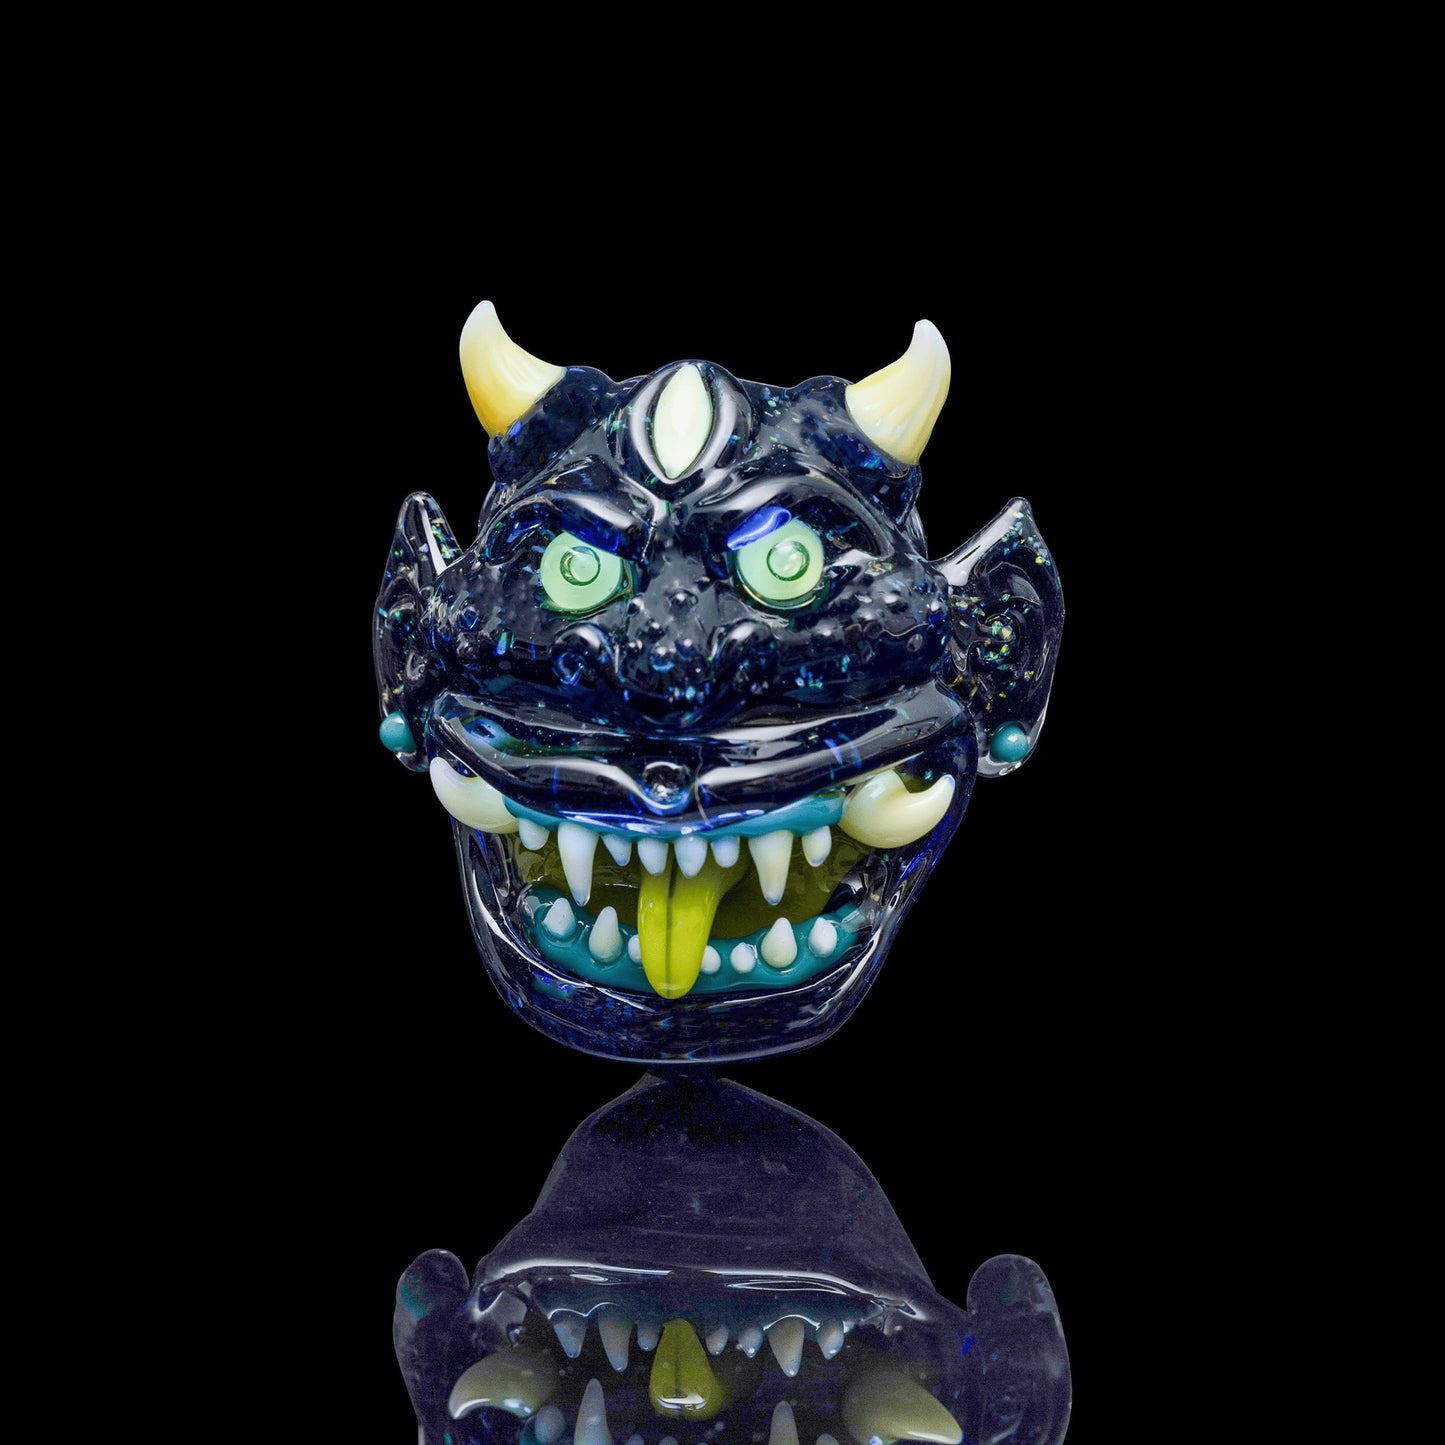 artisan-crafted glass pendant - Crushed Opal Oni Pendant by Nathan Belmont (Belmont’s Beasts)